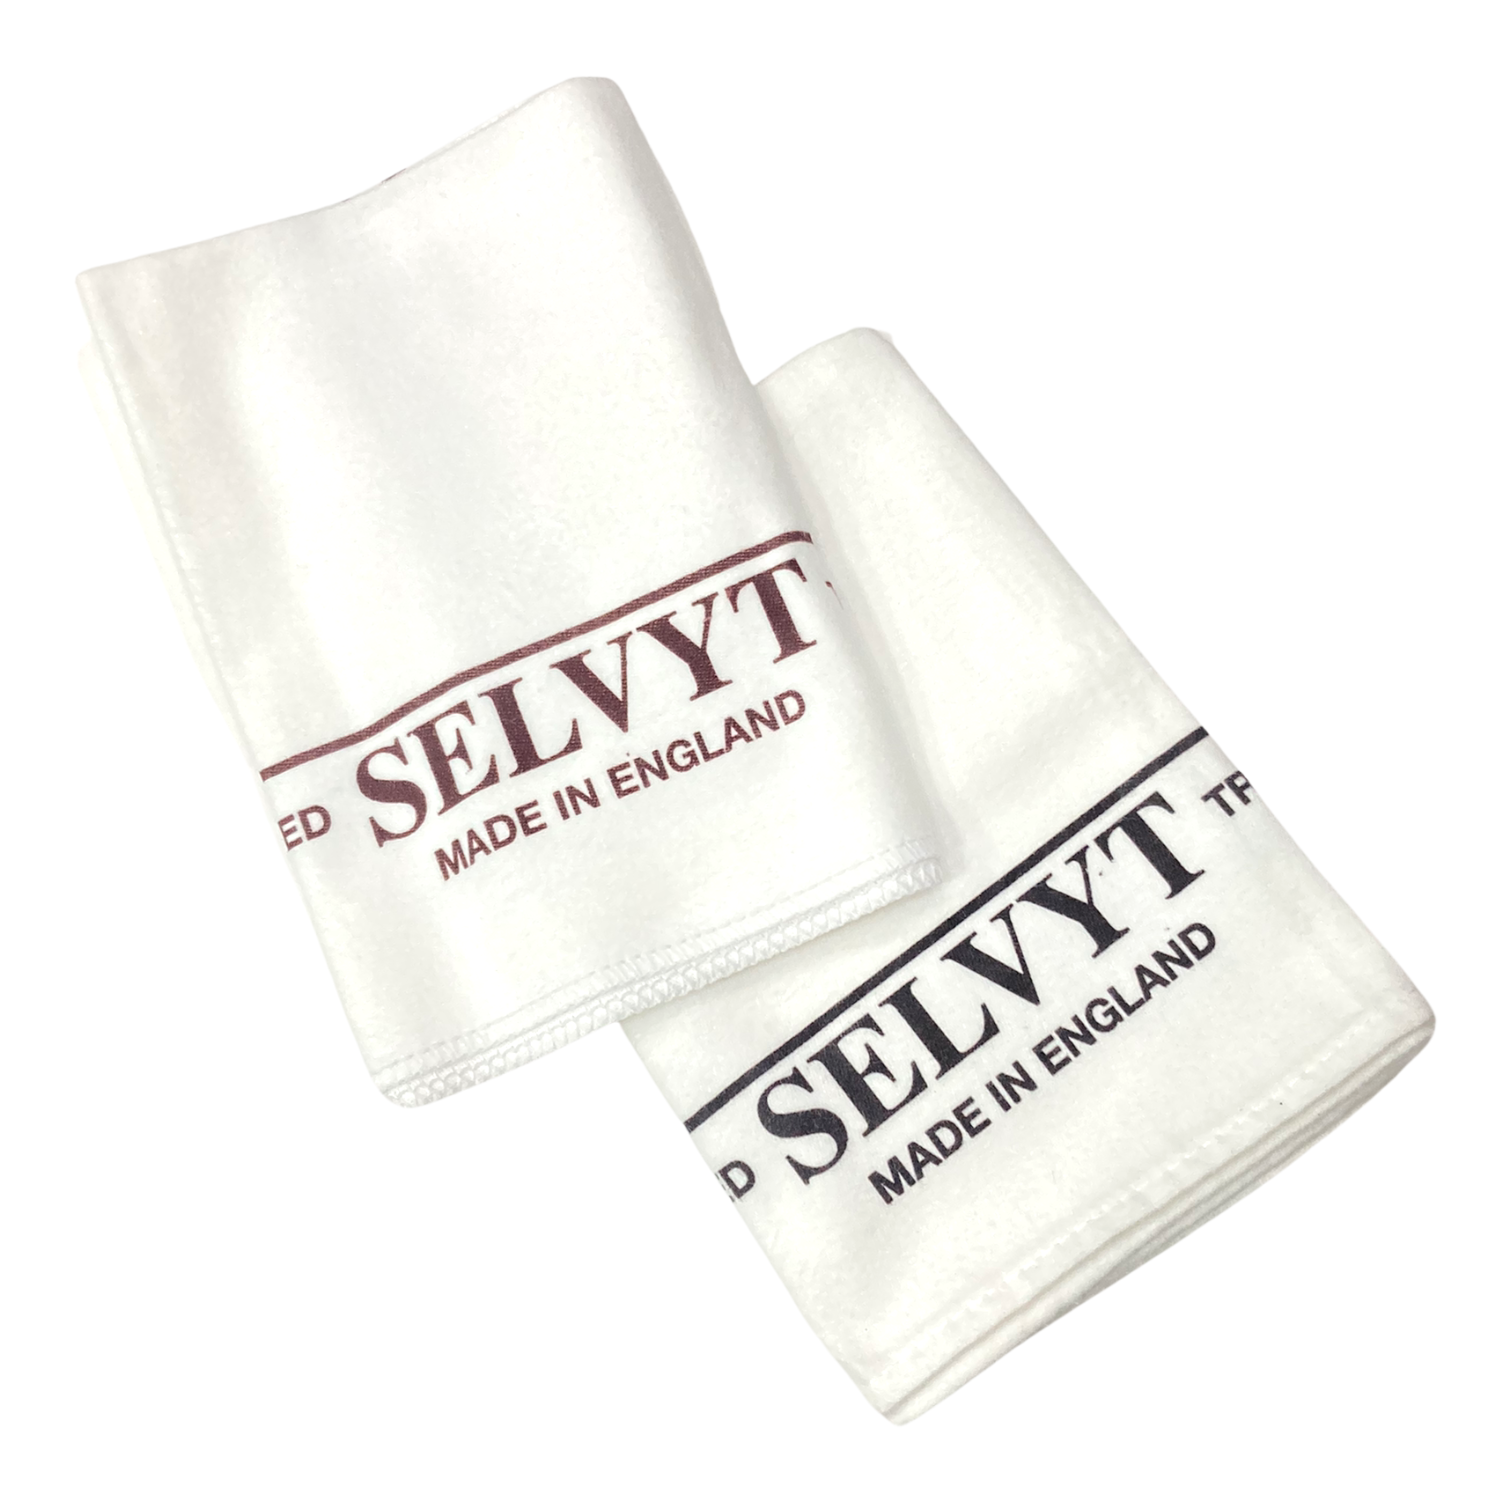 Selvyt Polishing Cloth for Jewelry. Small 5 Inch Square, Lint Free